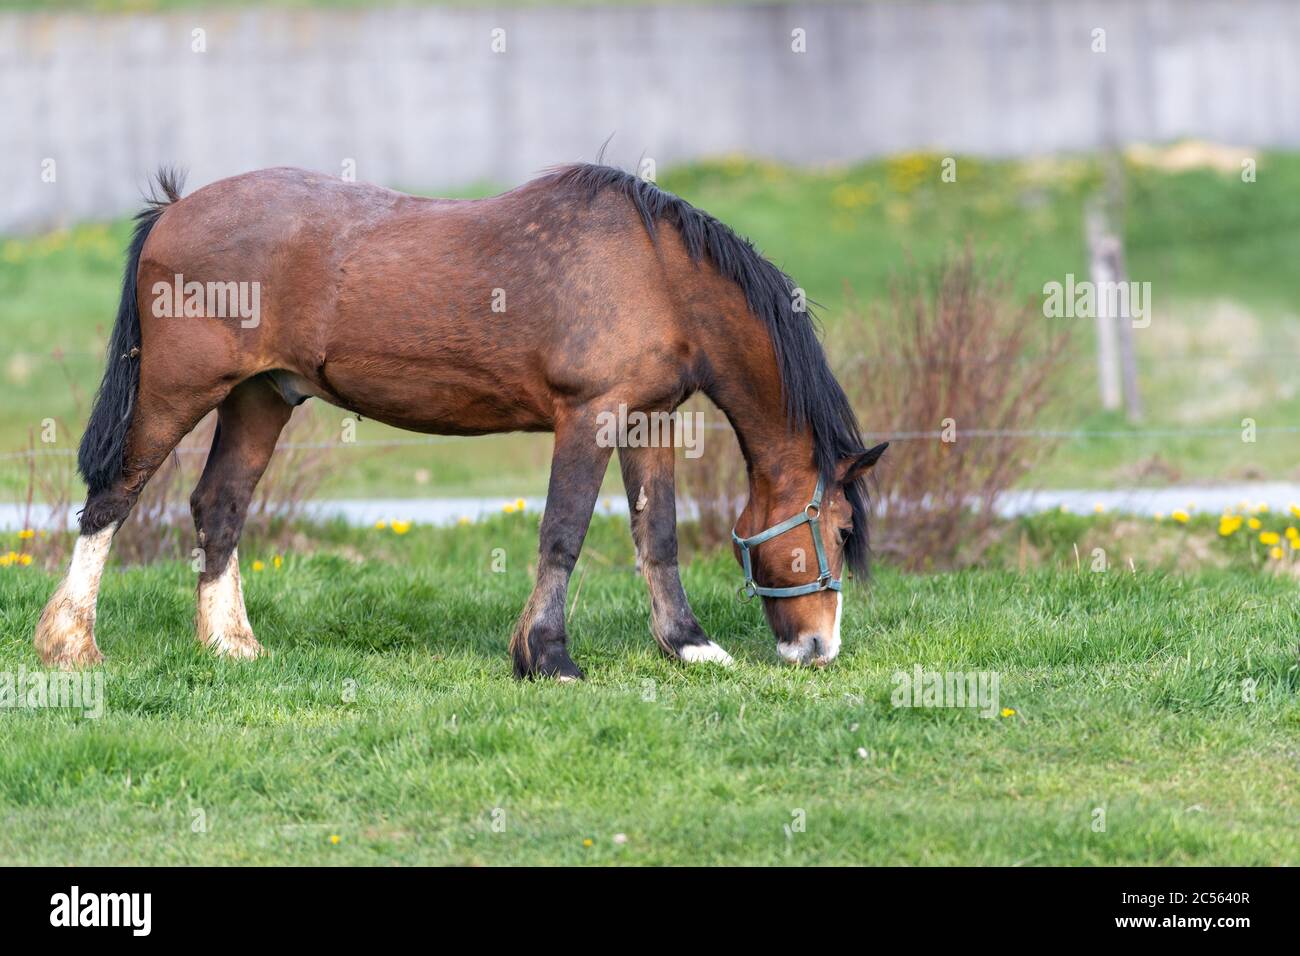 A chestnut brown horse standing and grazing in a green grassy field. The large muscular animal has white hoofs, long black mane and tail. Stock Photo